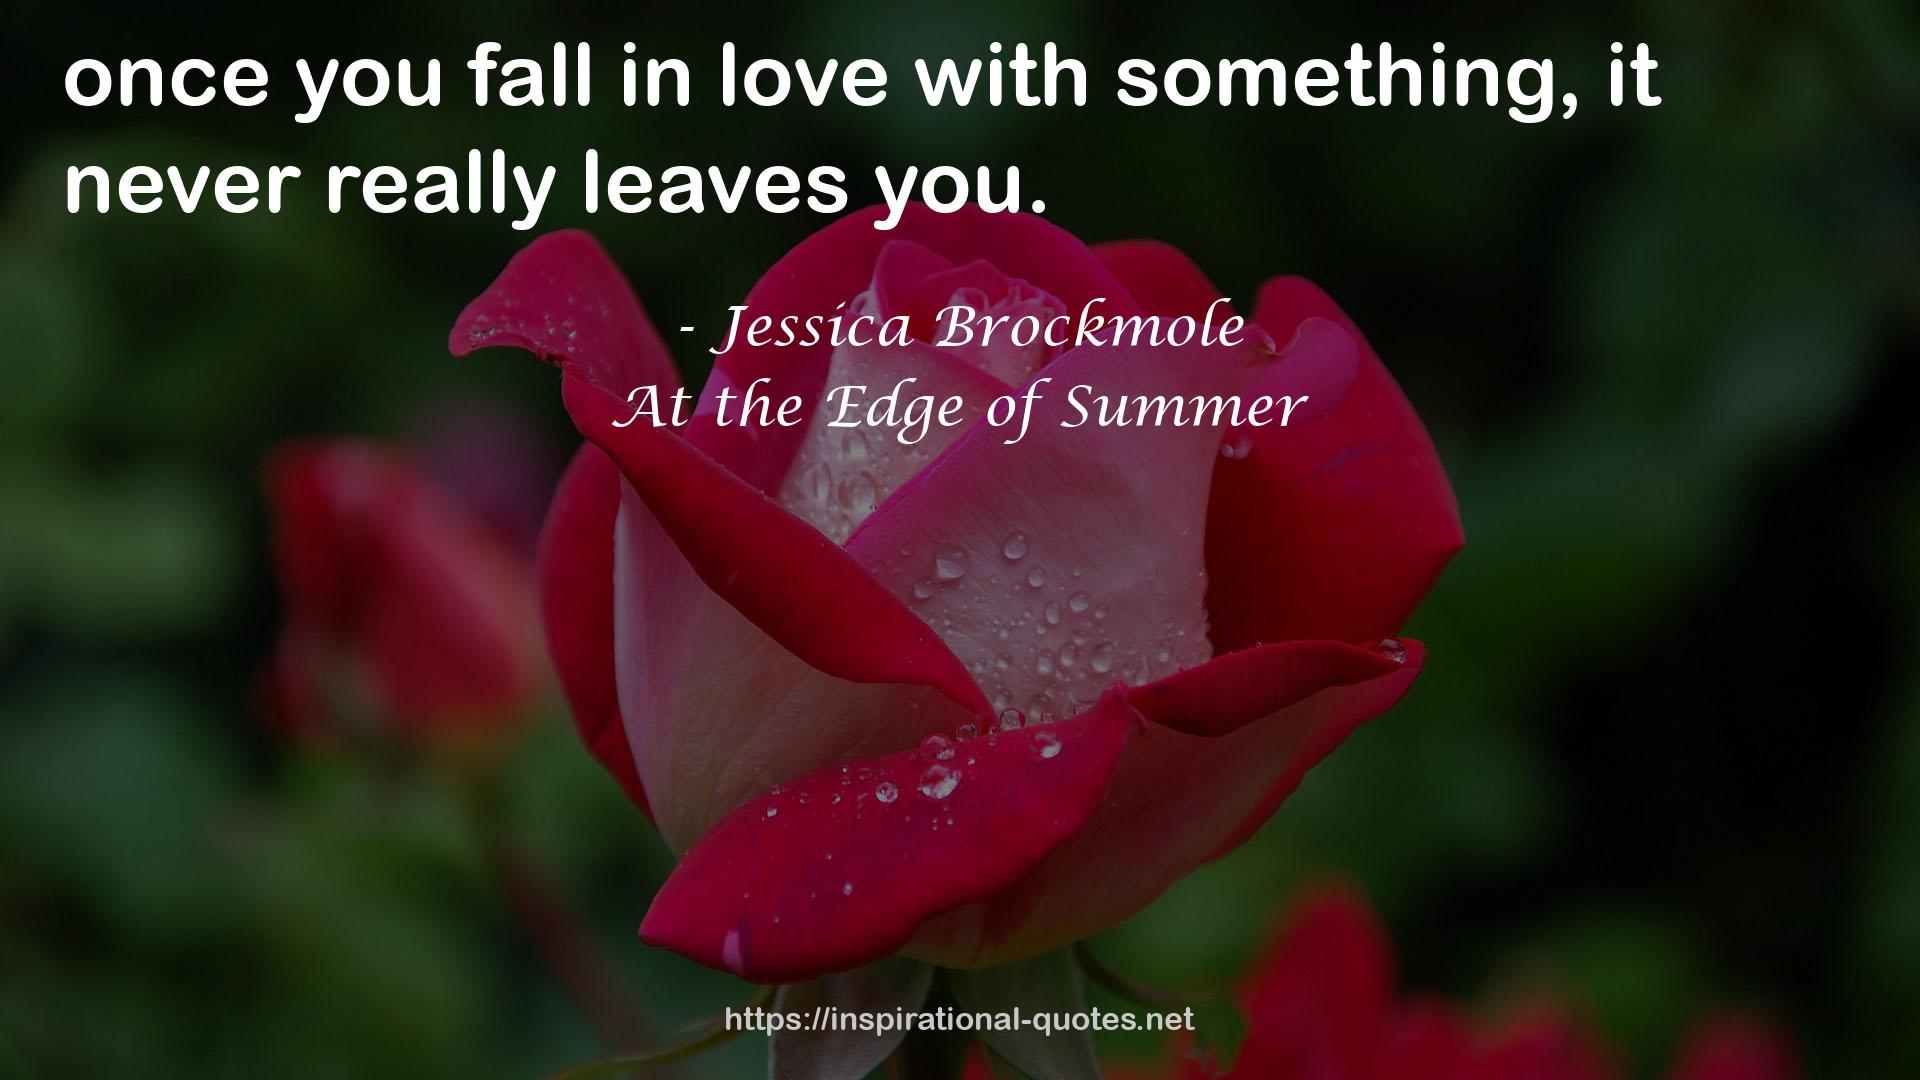 At the Edge of Summer QUOTES